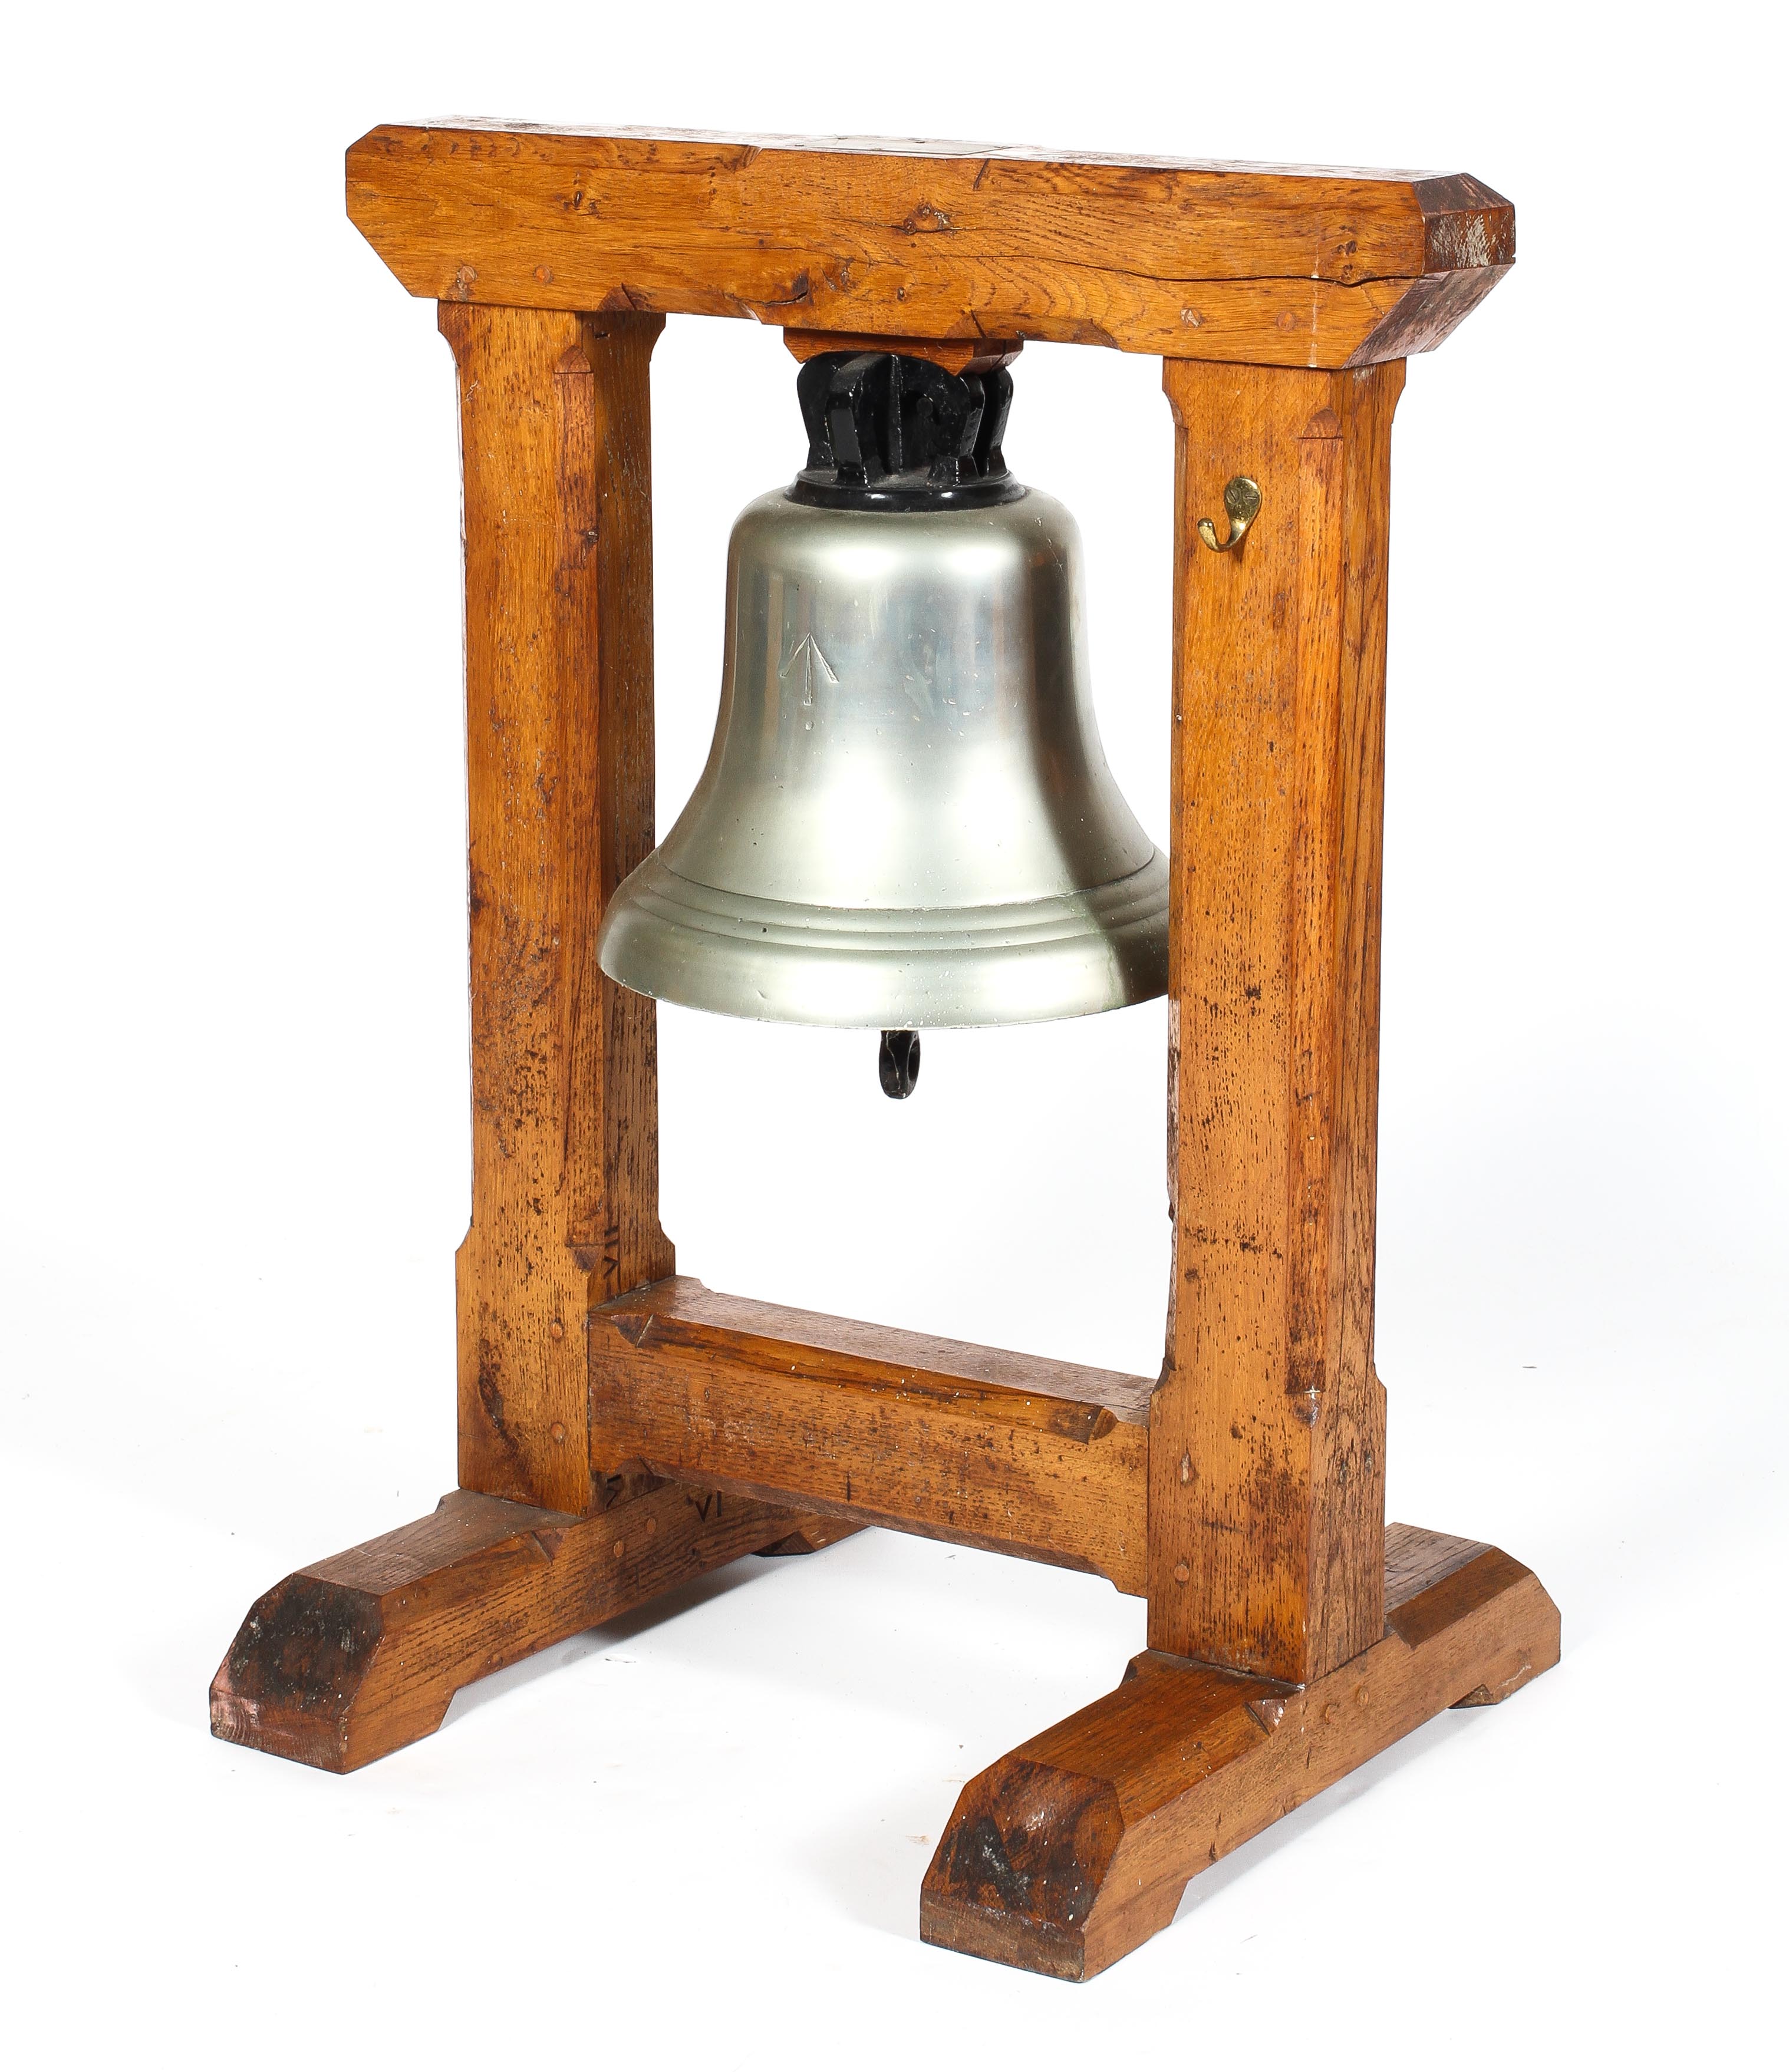 A large brass bell suspended from an oak frame,